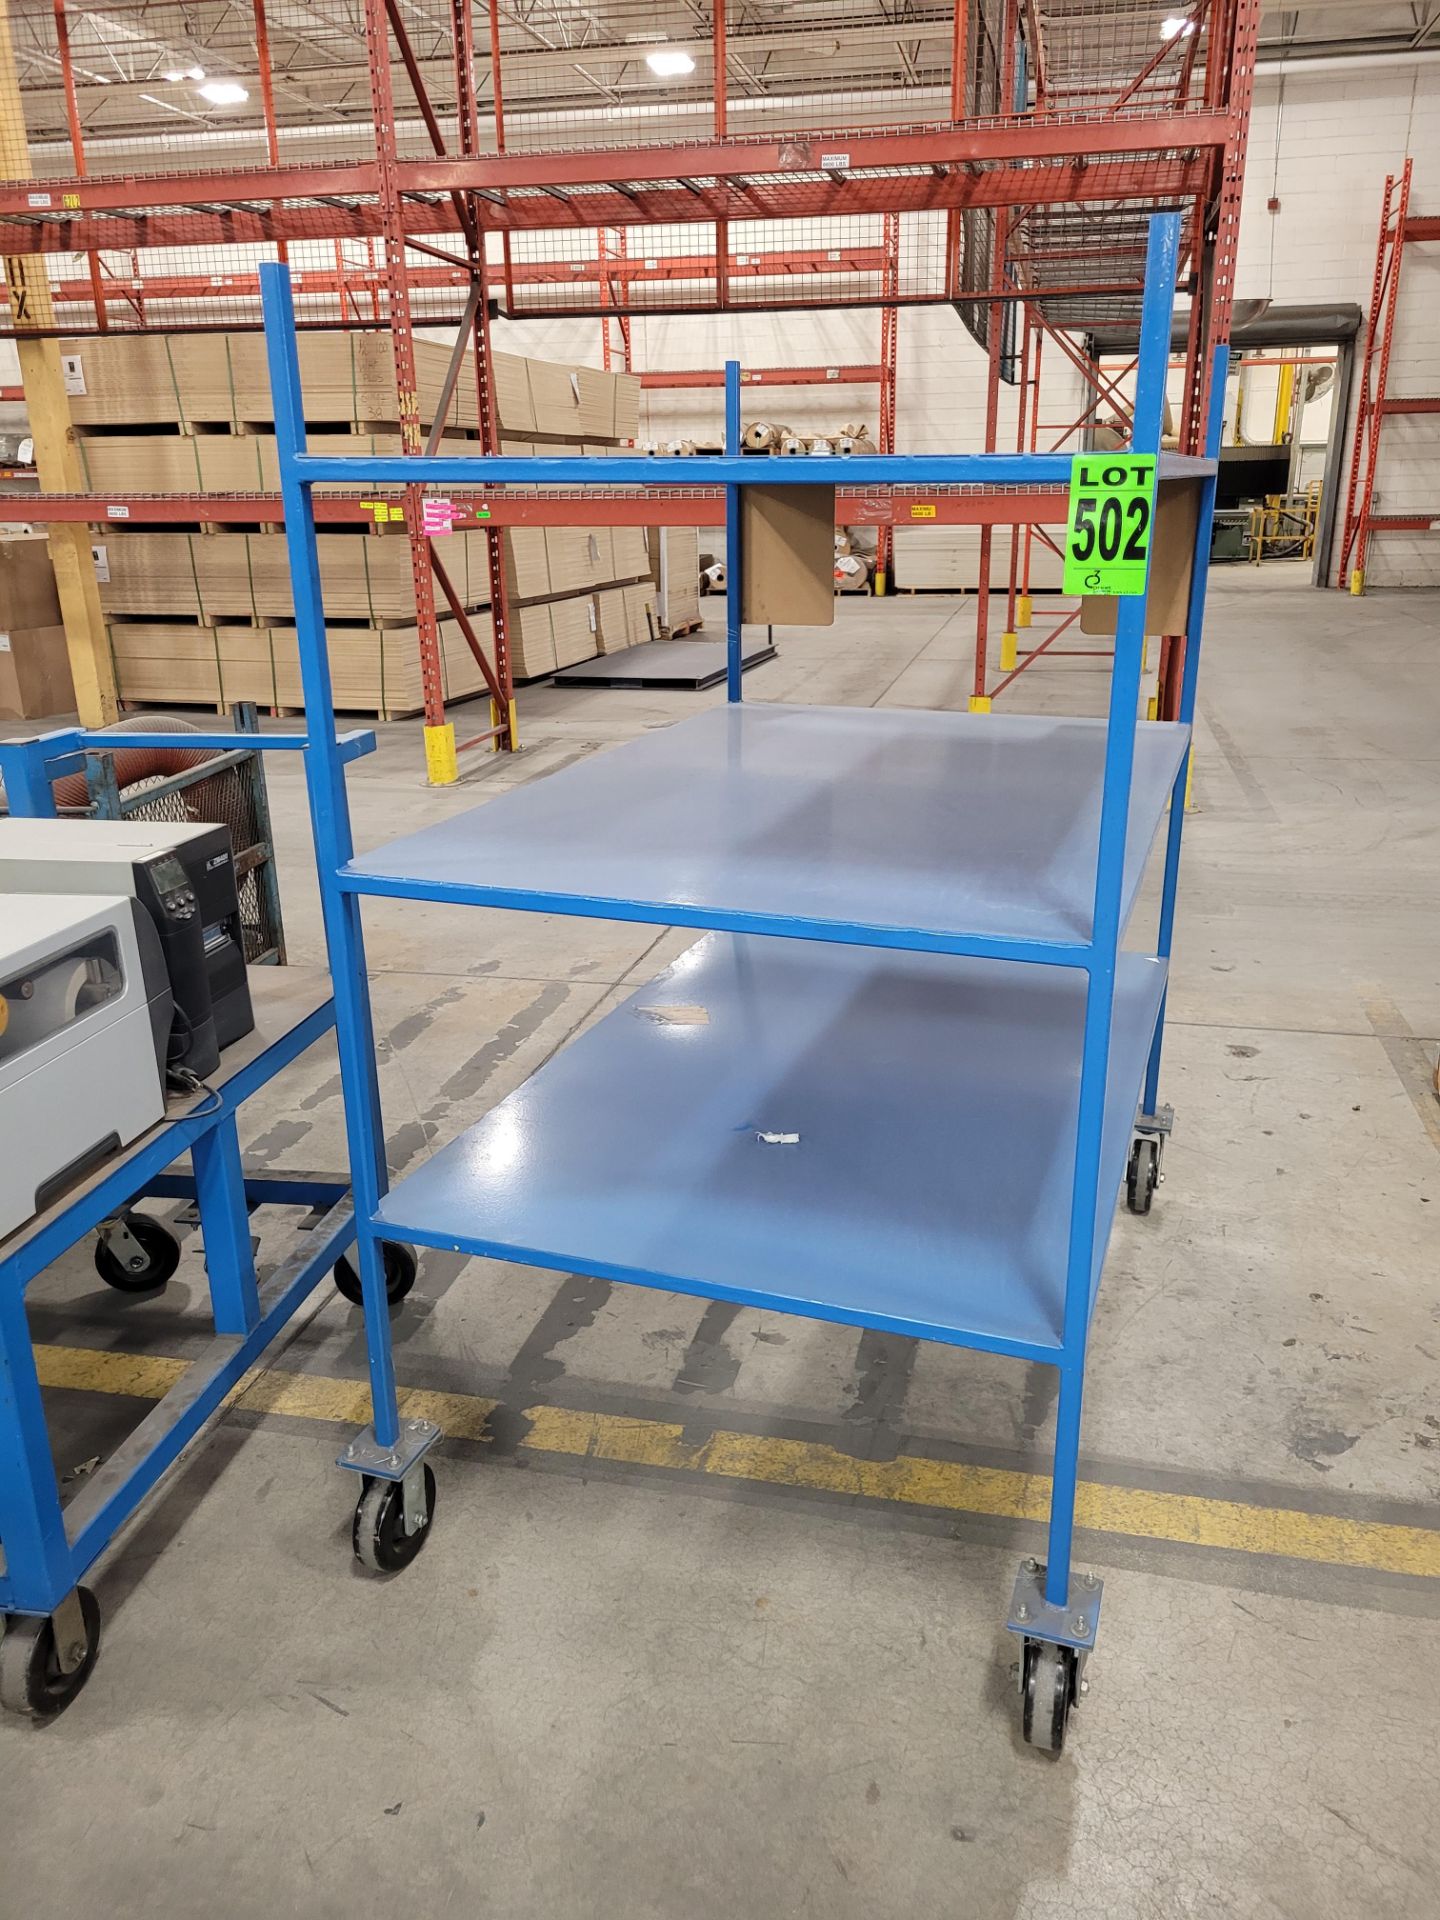 3-level mobile steel shelving unit on casters, 3'' x 5' x 5' w/handles - Image 2 of 4